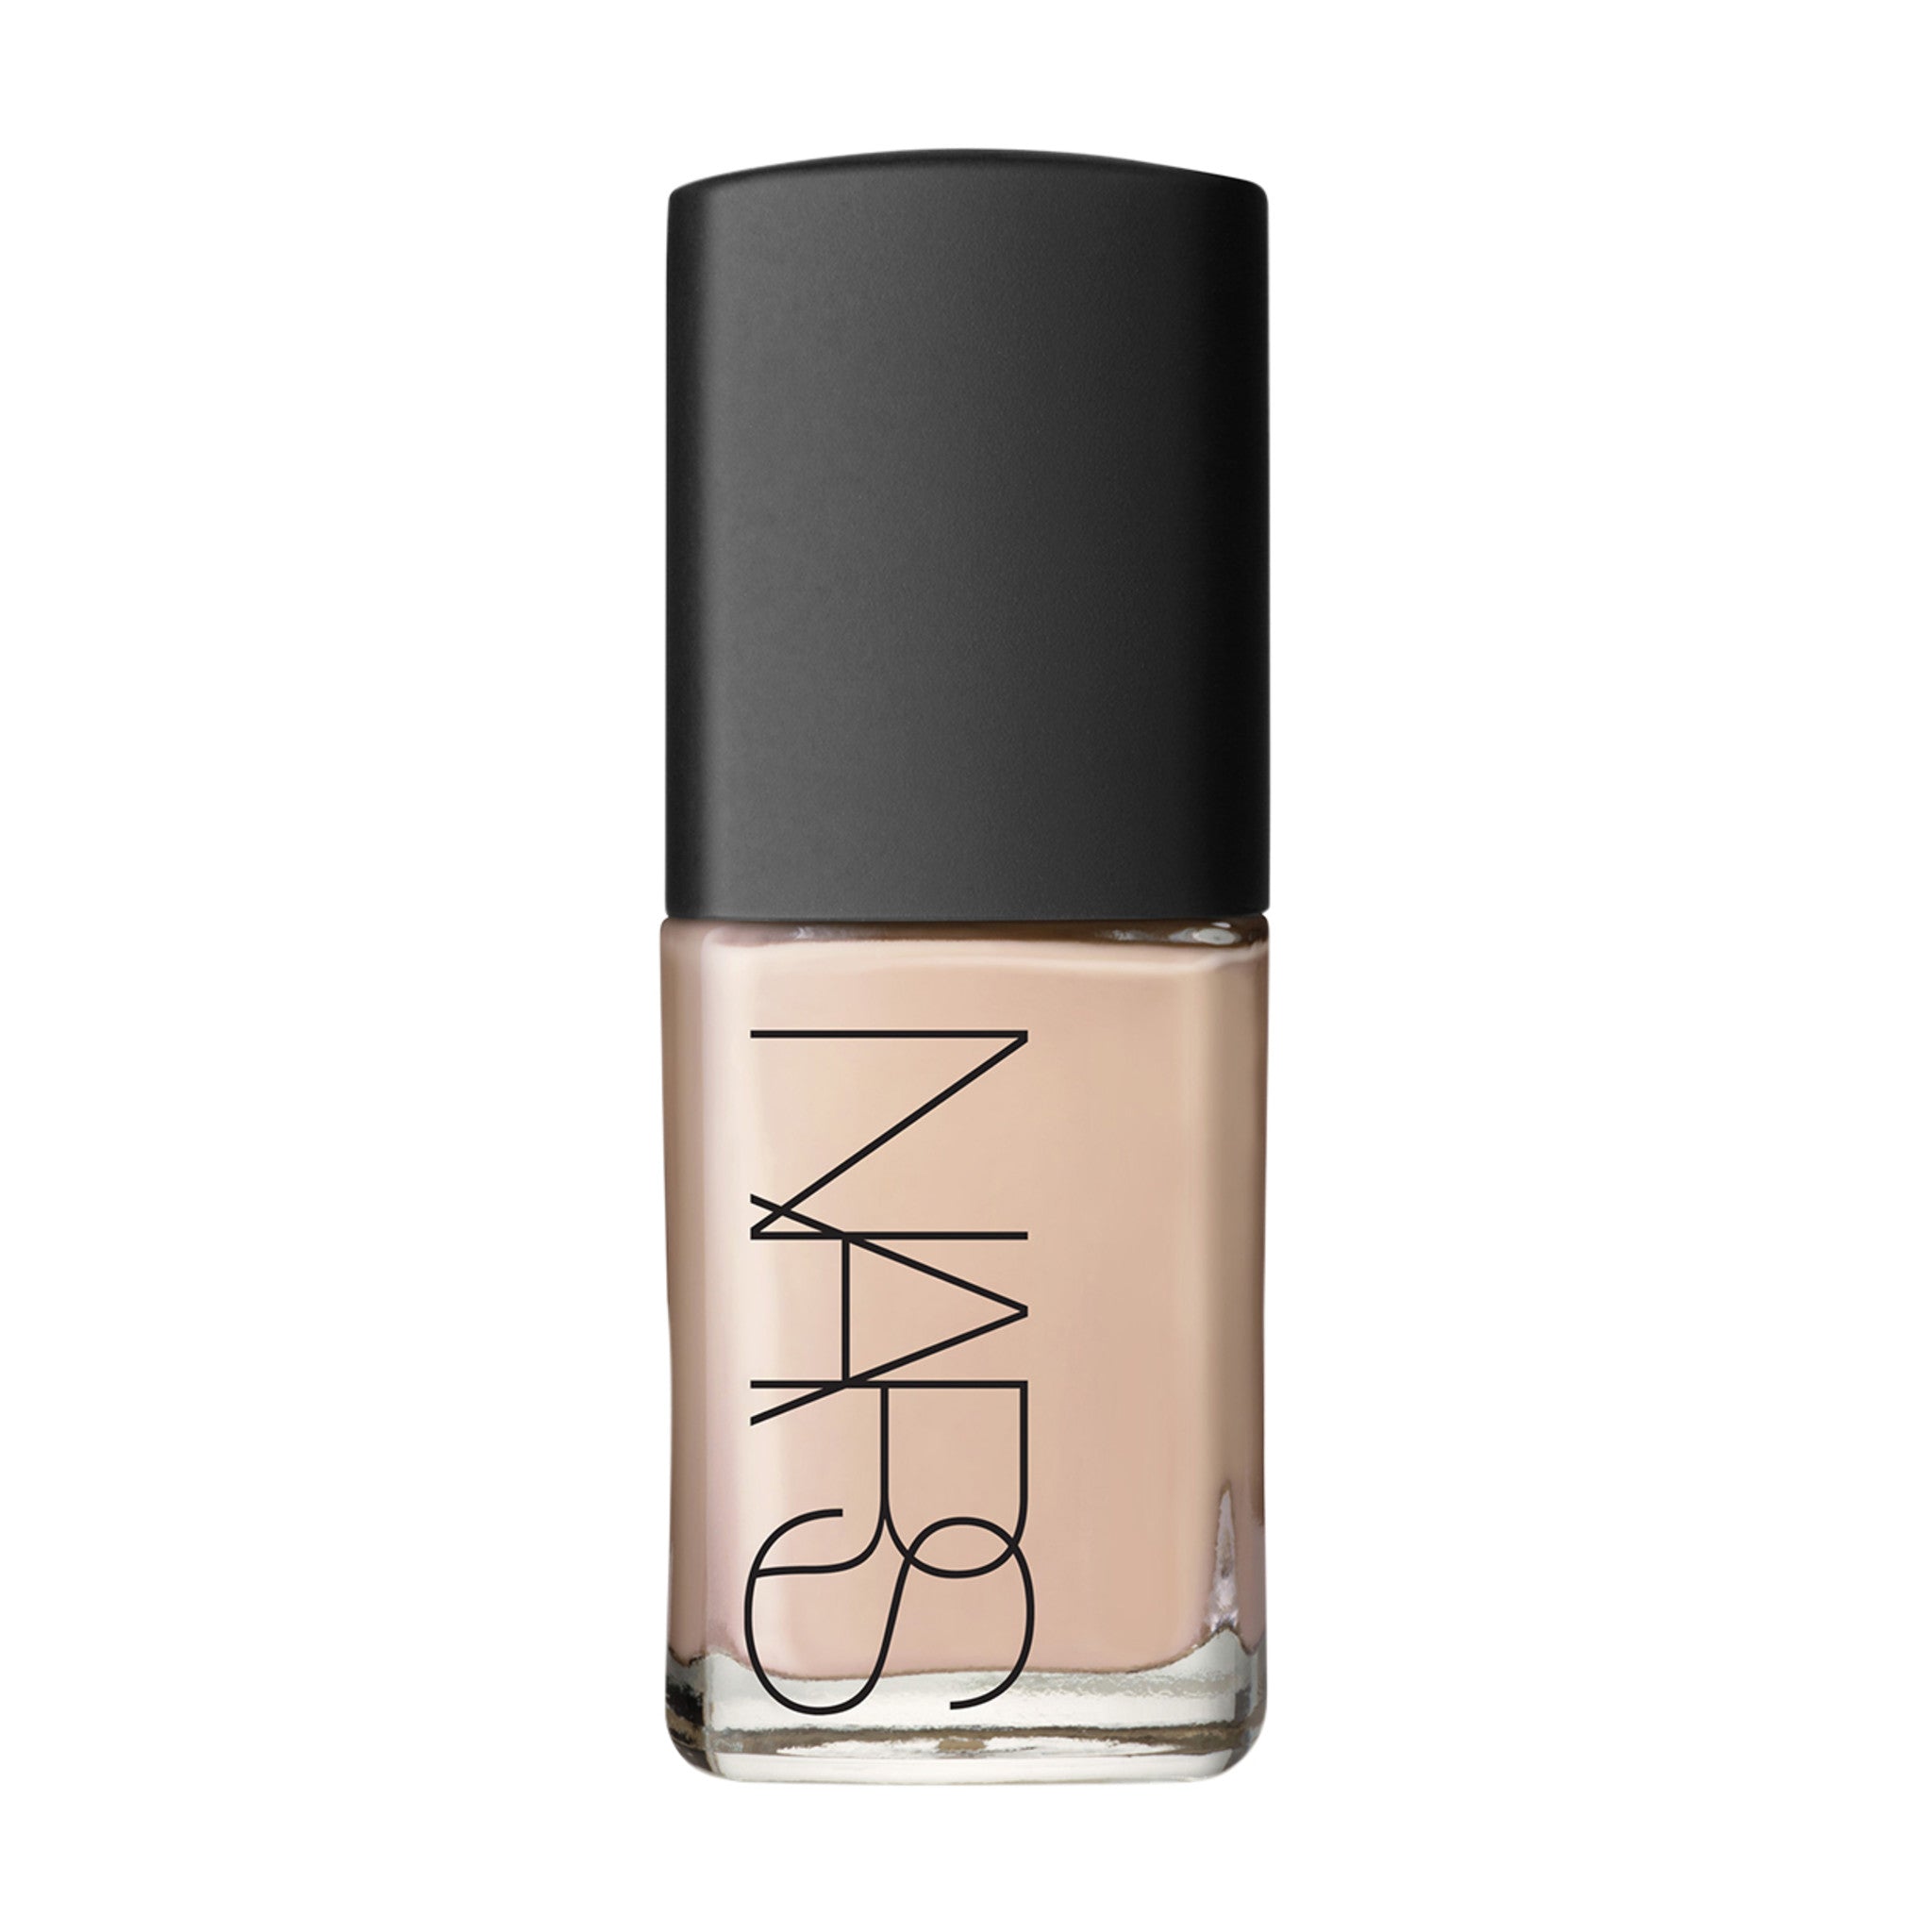 Nars Sheer Glow Foundation Color/Shade variant: Mont Blanc L2 main image. This product is for light neutral complexions